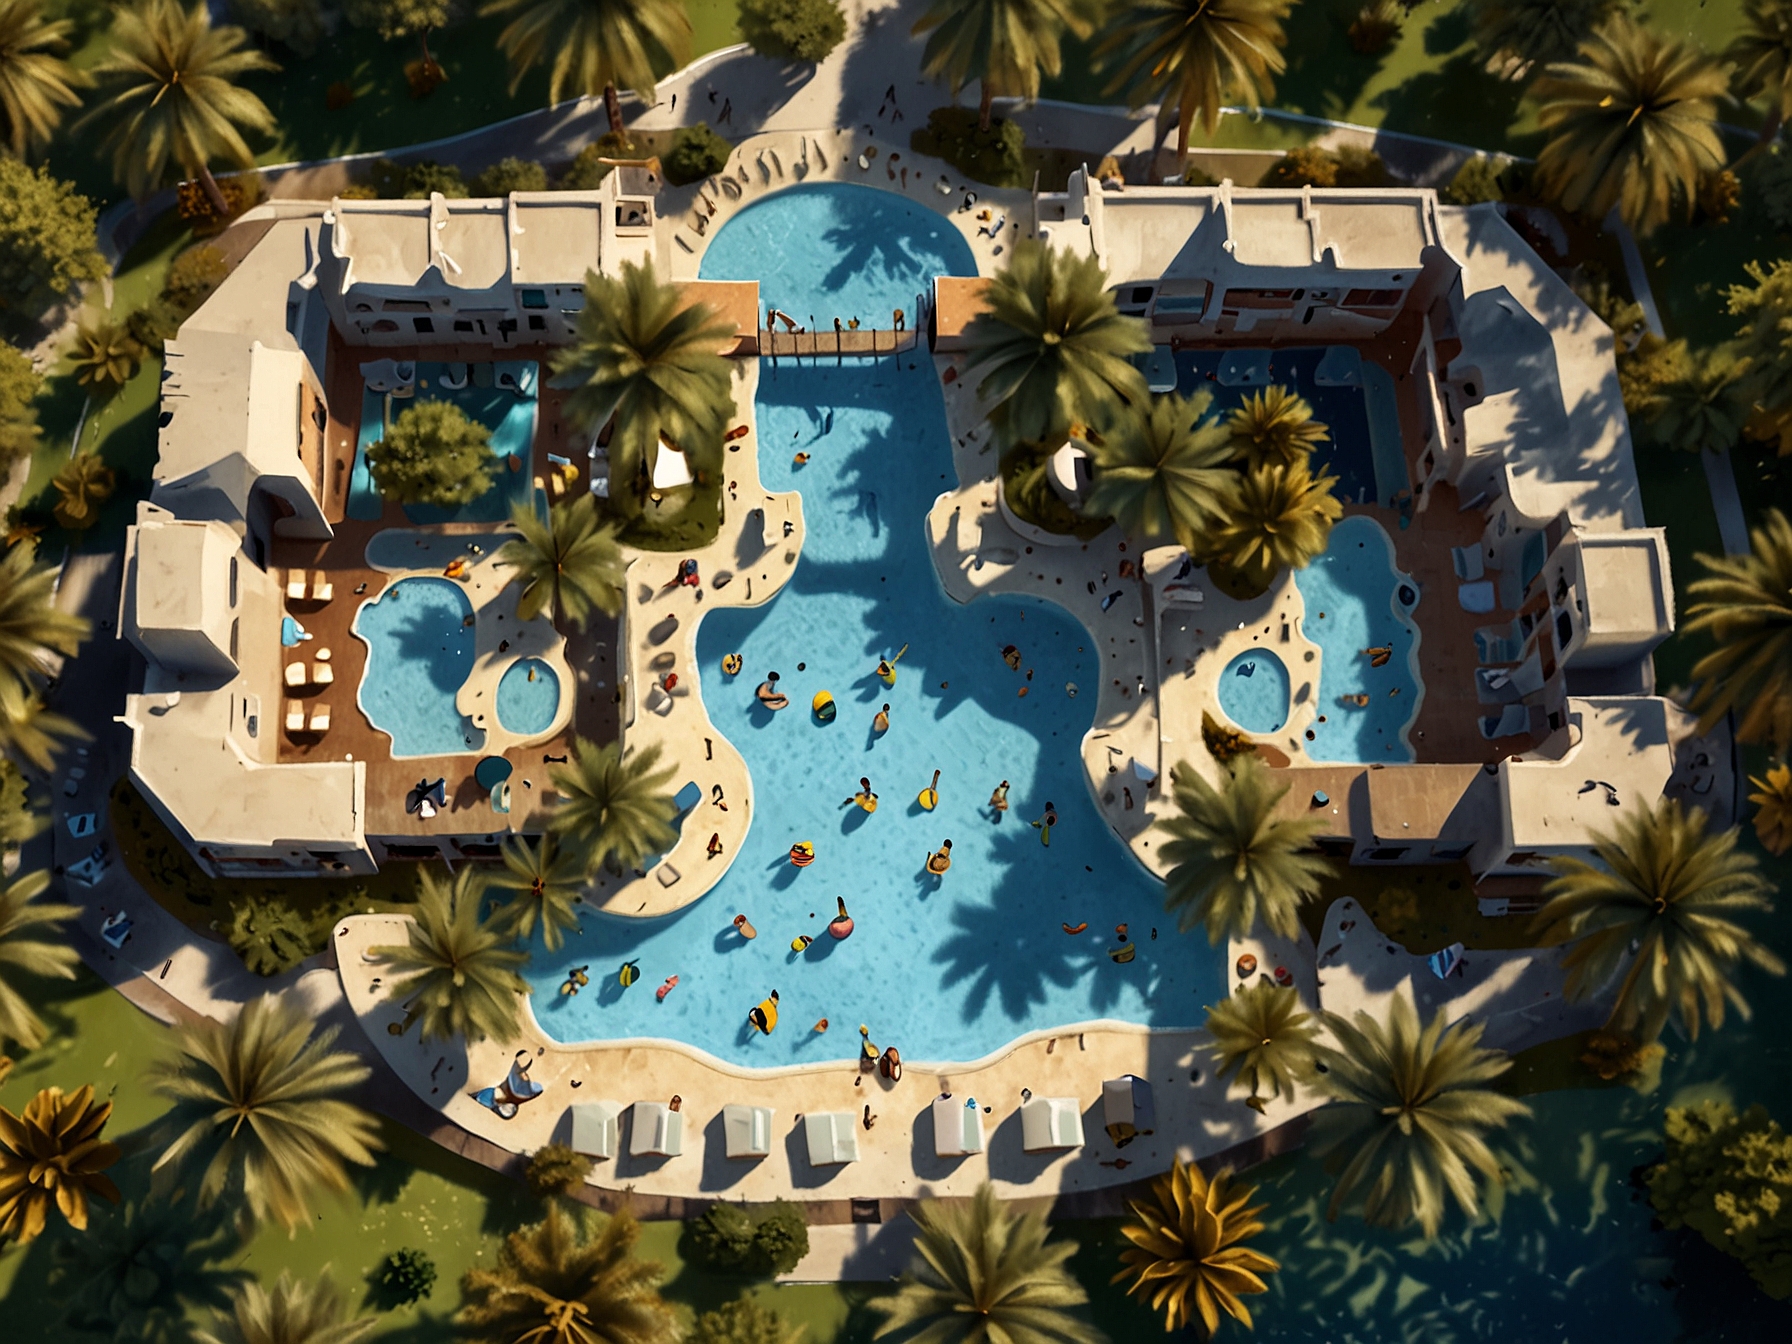 A serene aerial view of the waterpark hotel in Majorca, showcasing the expansive pool area, lazy rivers, and comfortable lounging areas under the bright Mediterranean sun.